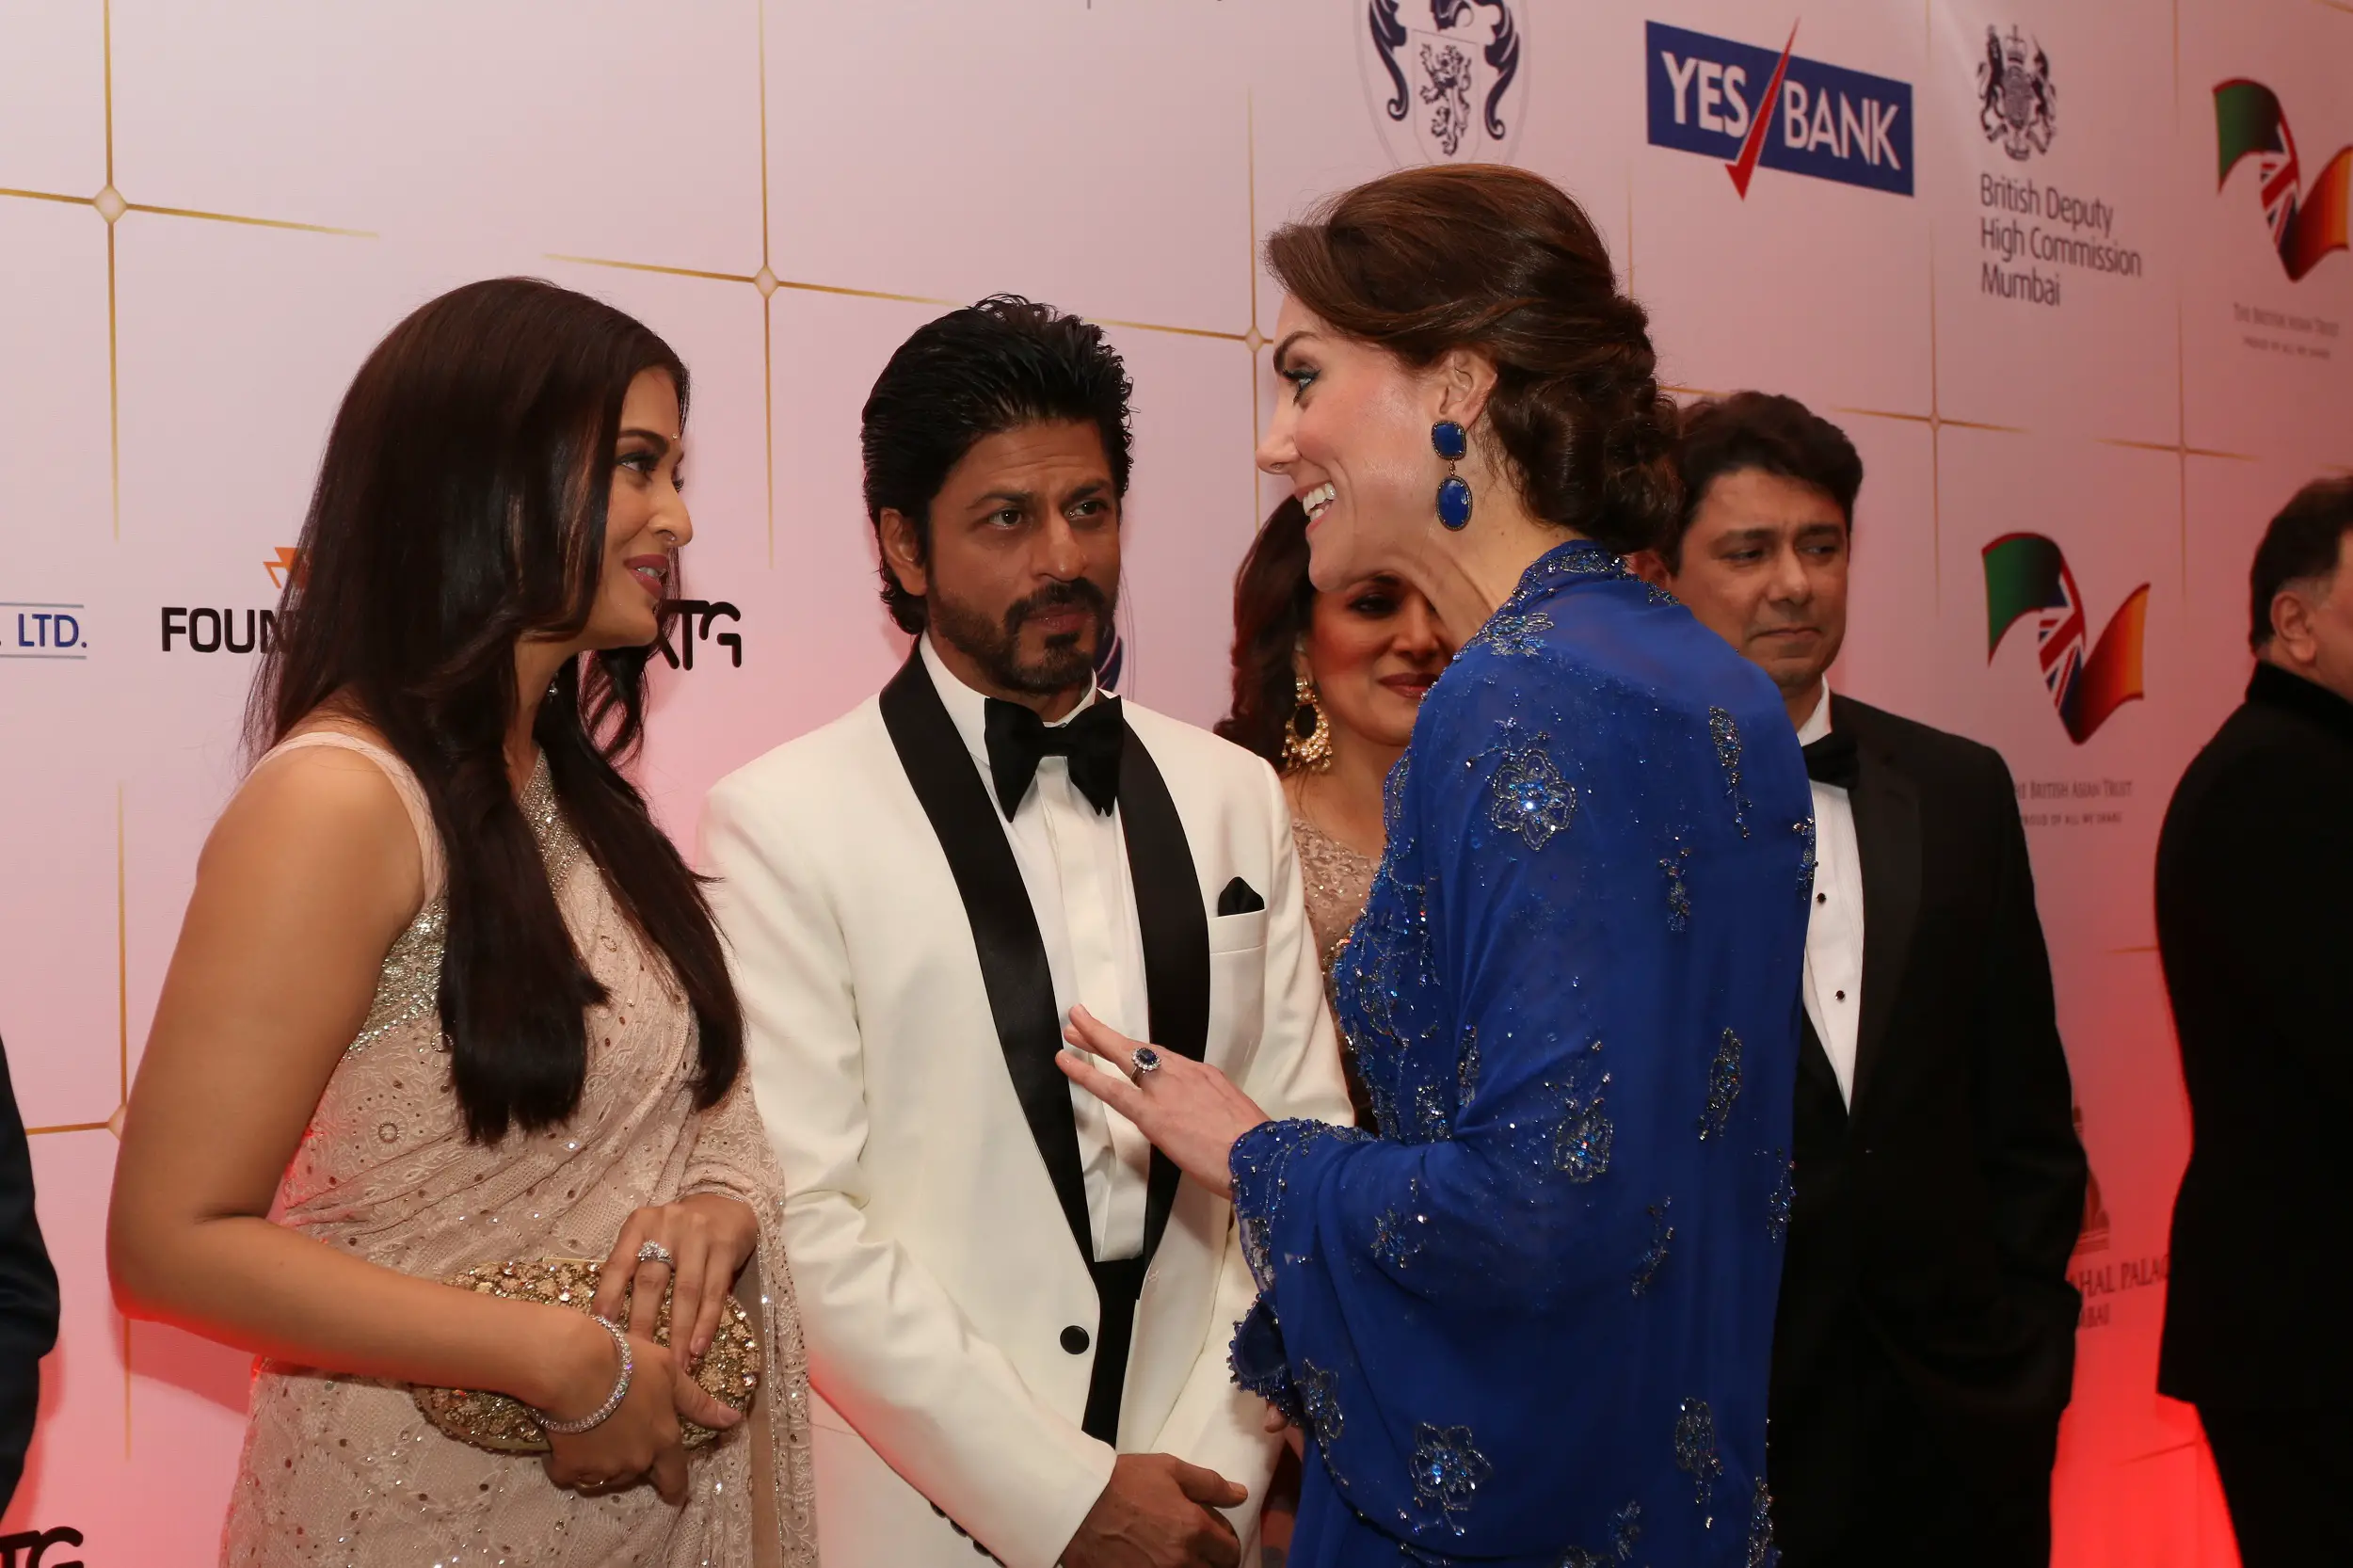 The Duchess of Cambridge met with famous Bollywood Celebrities at Gala in India